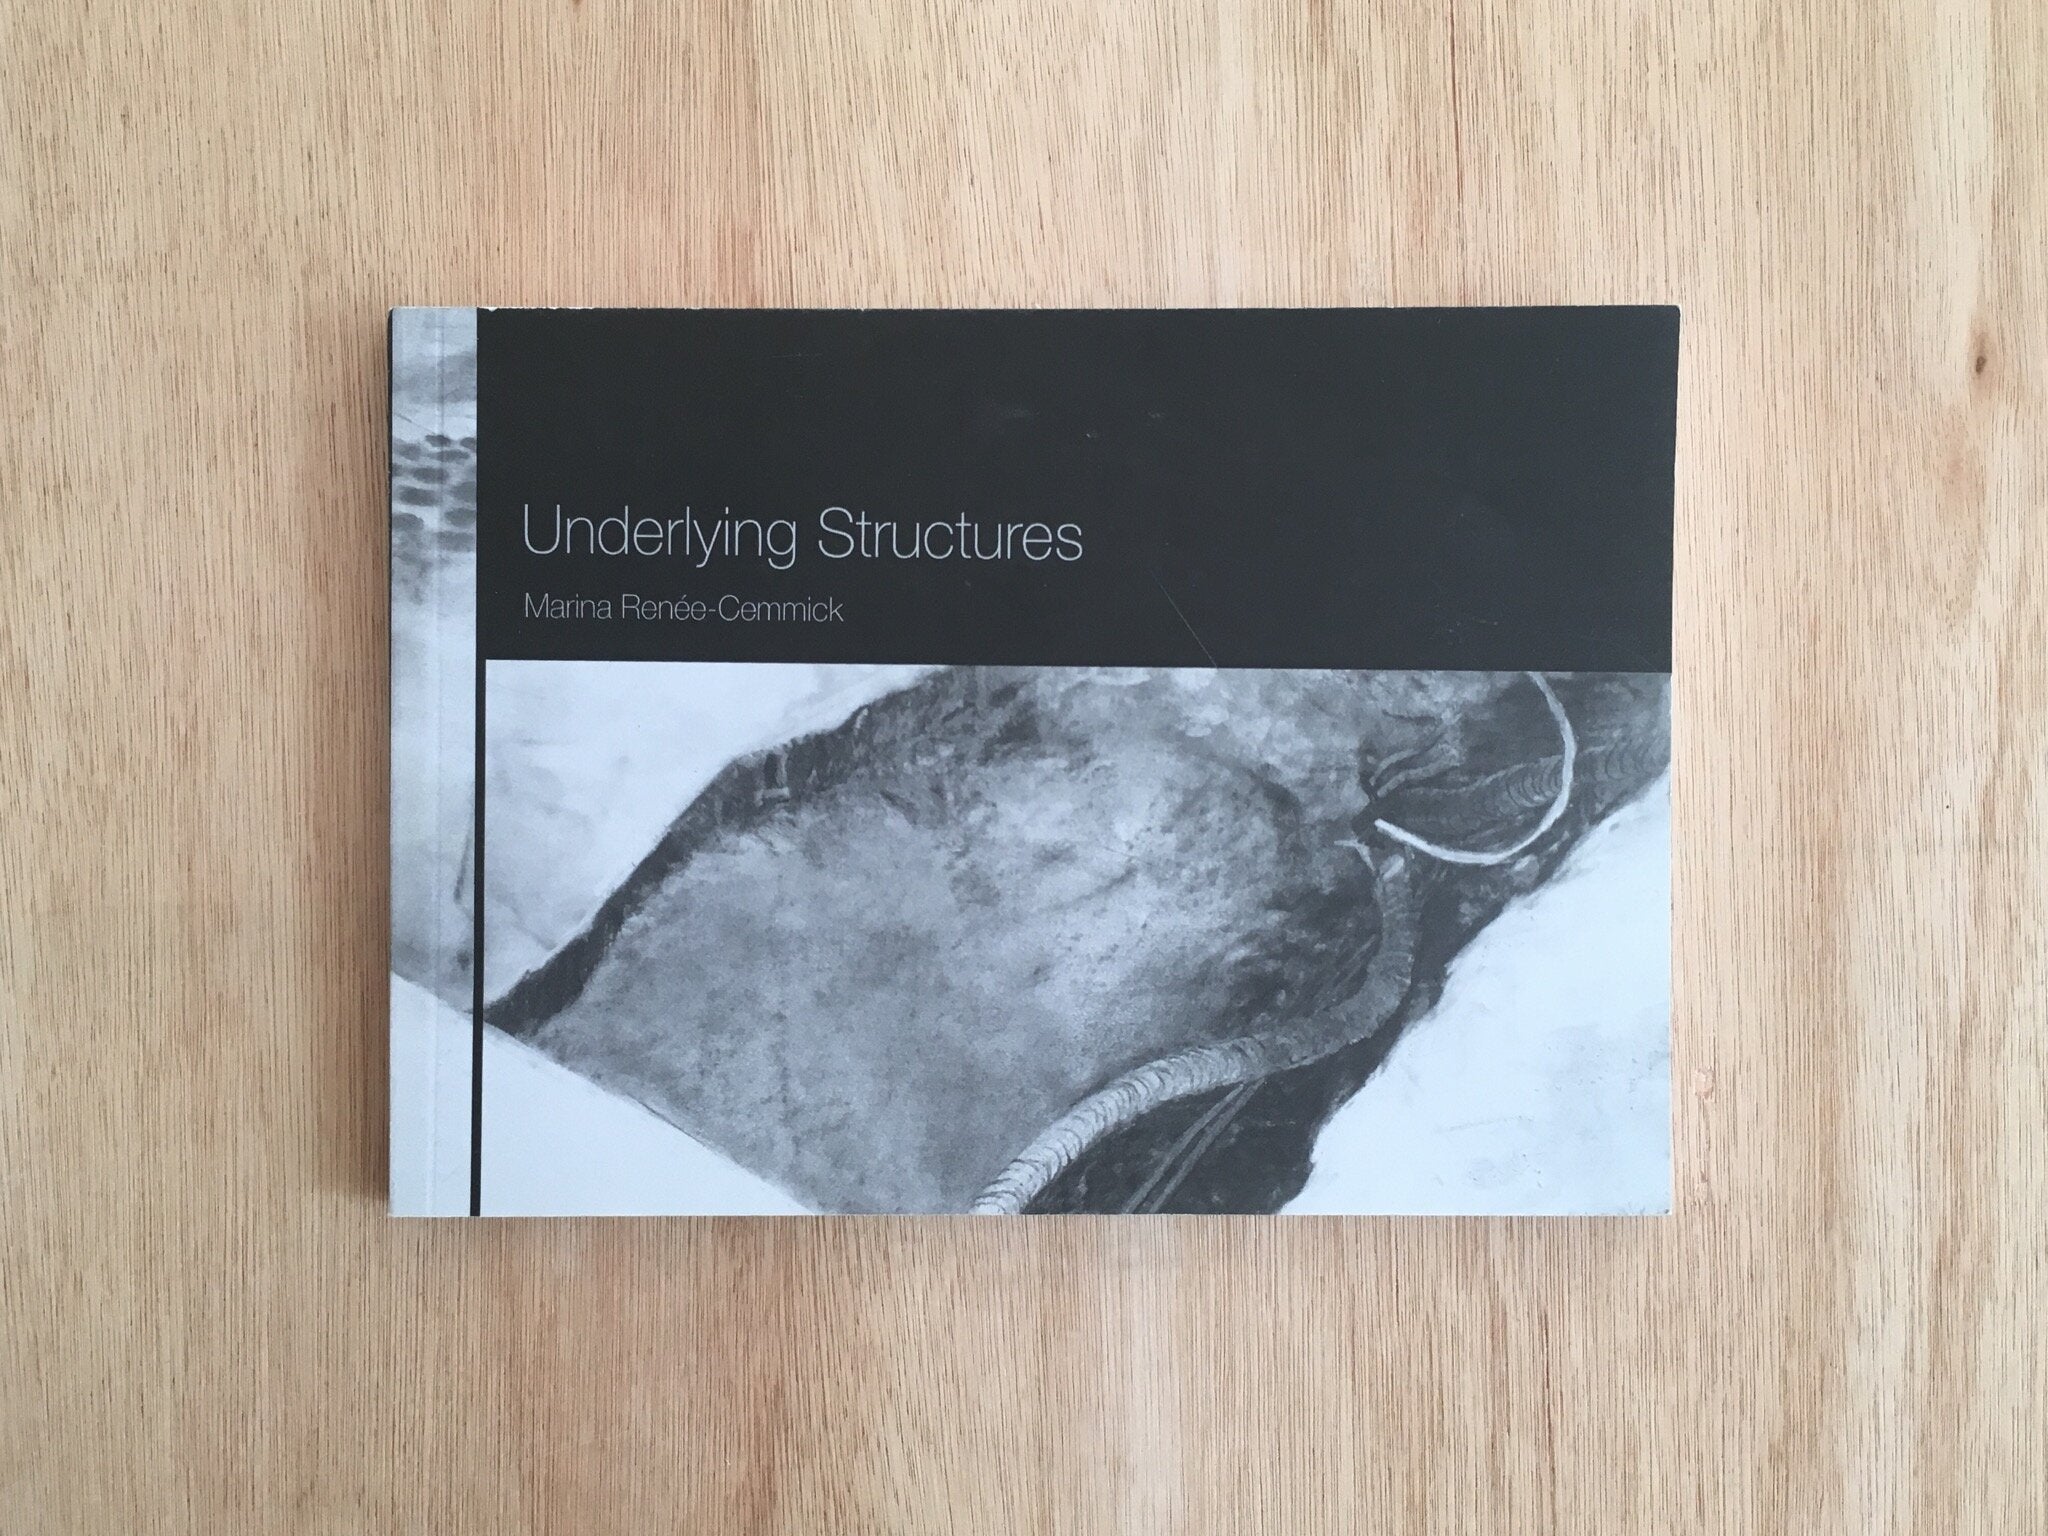 UNDERLYING STRUCTURES by Marina Renée-Cemmick